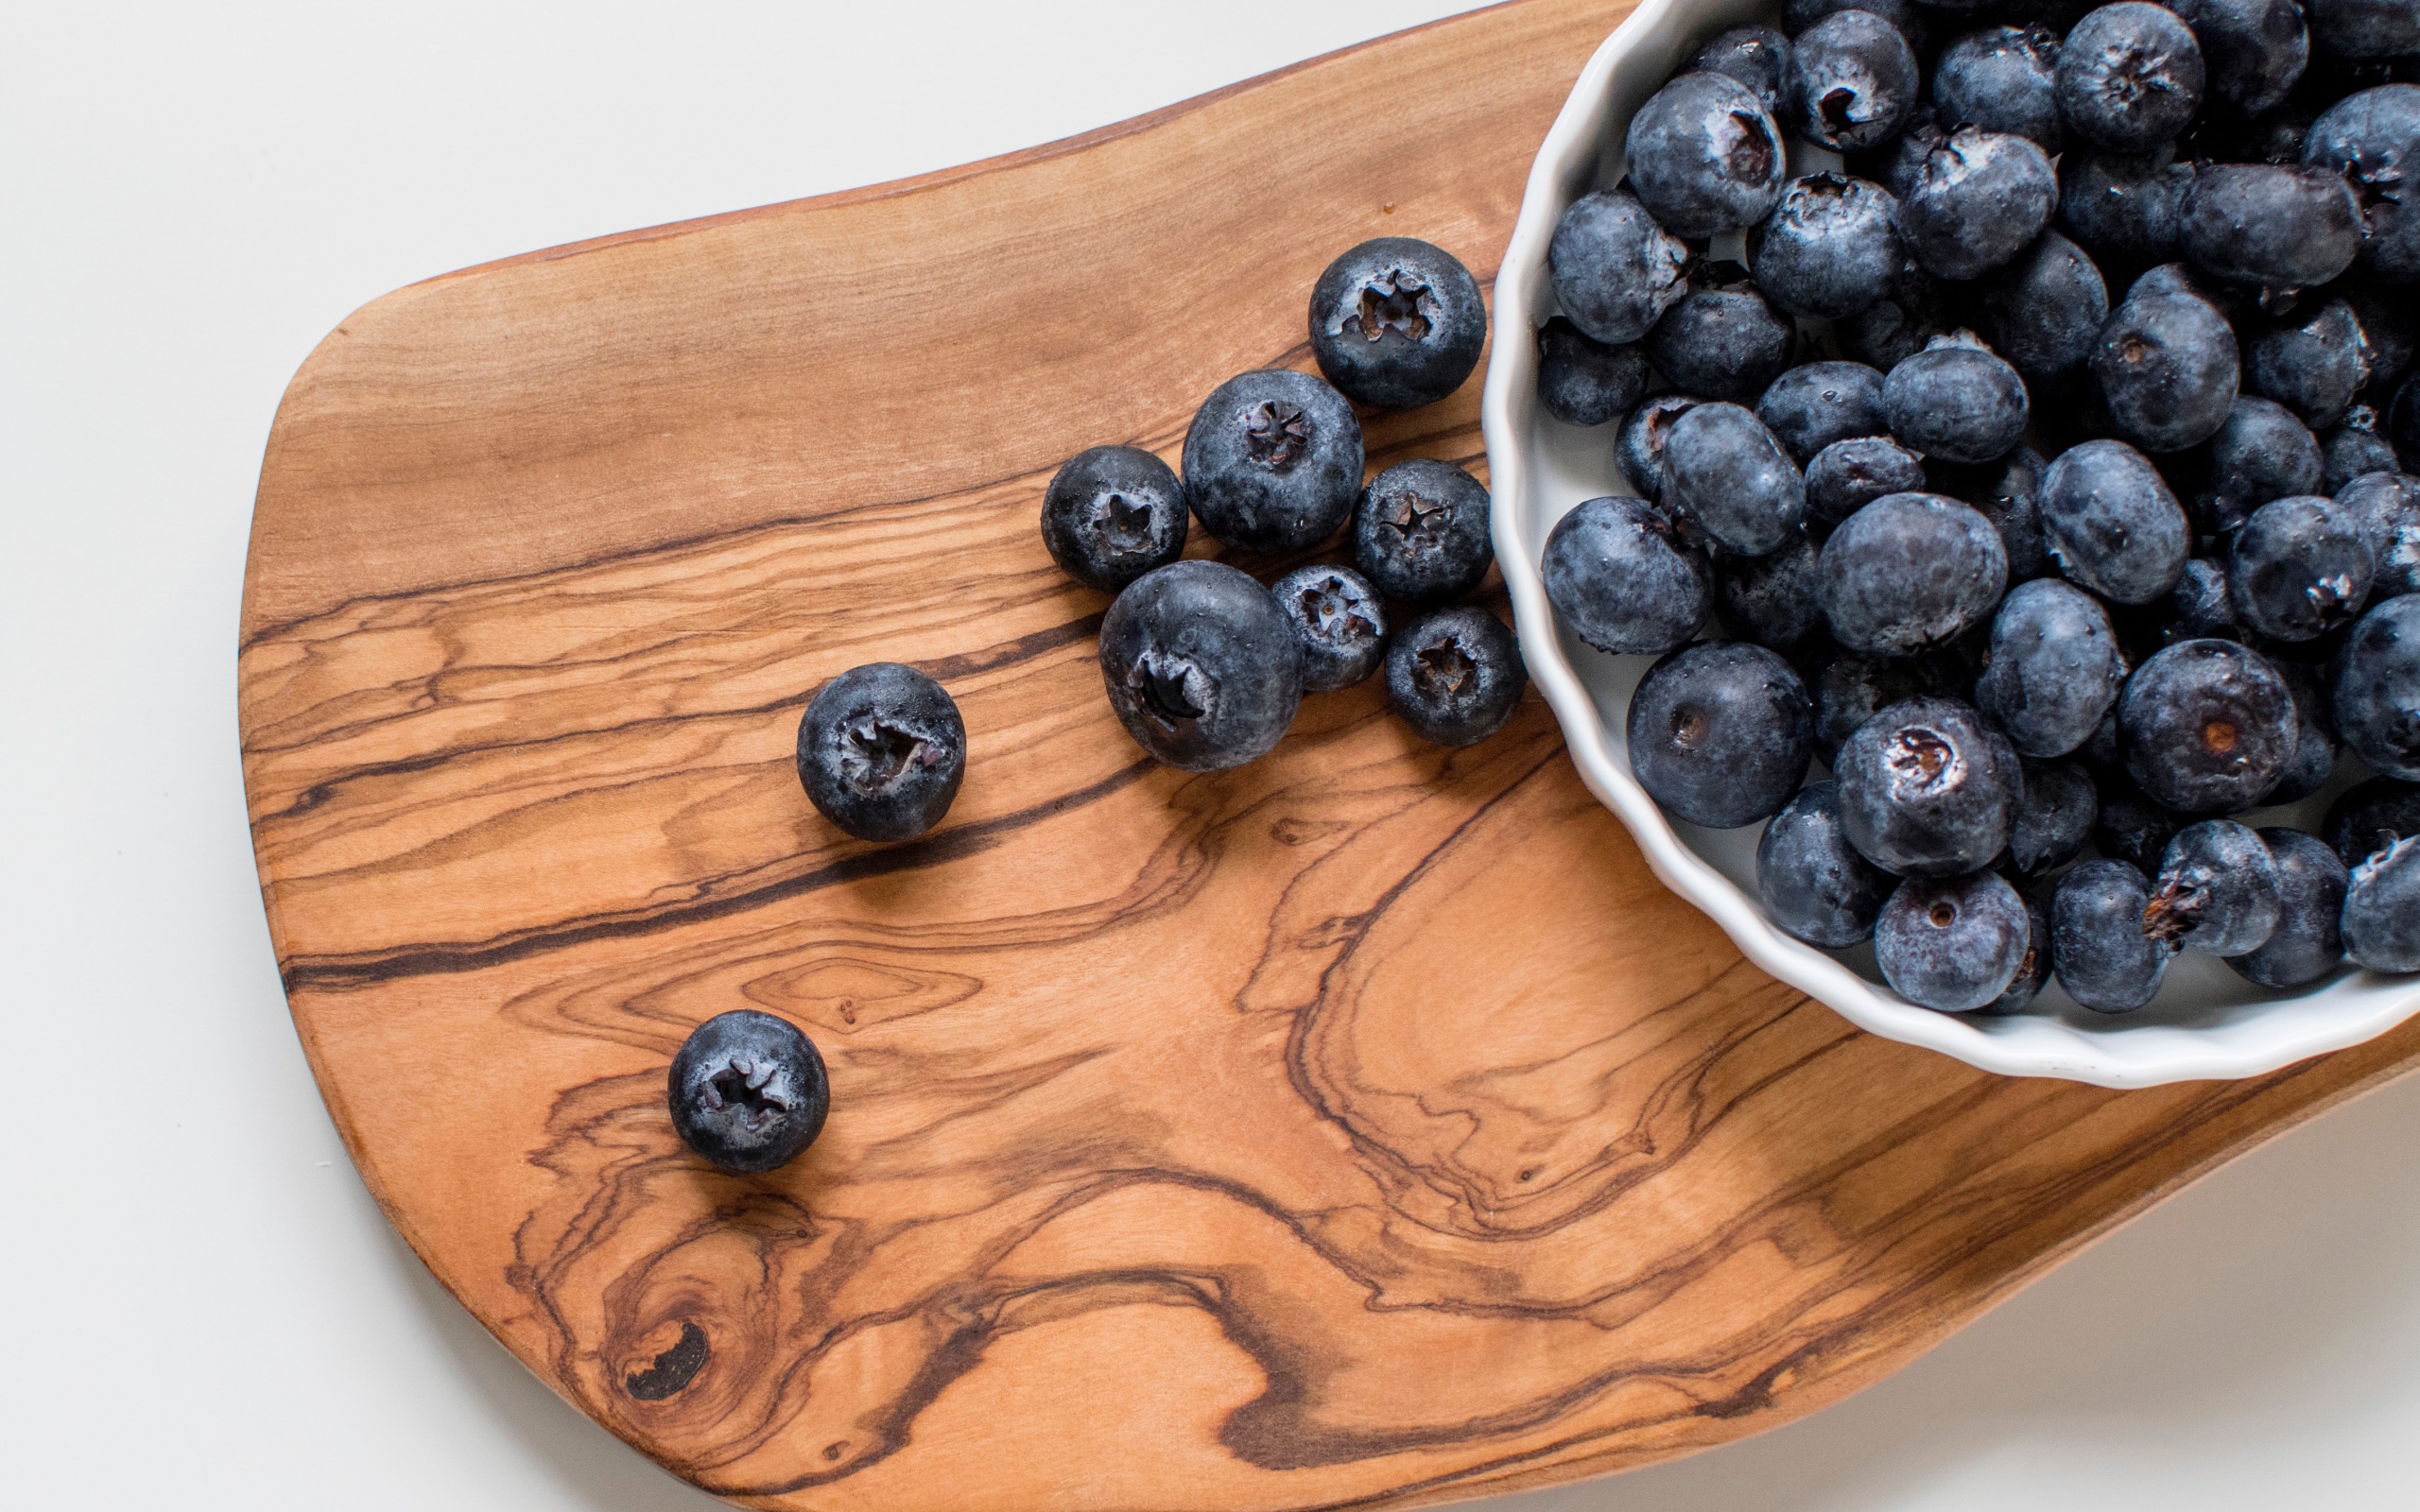 Ripe large blueberries on the board